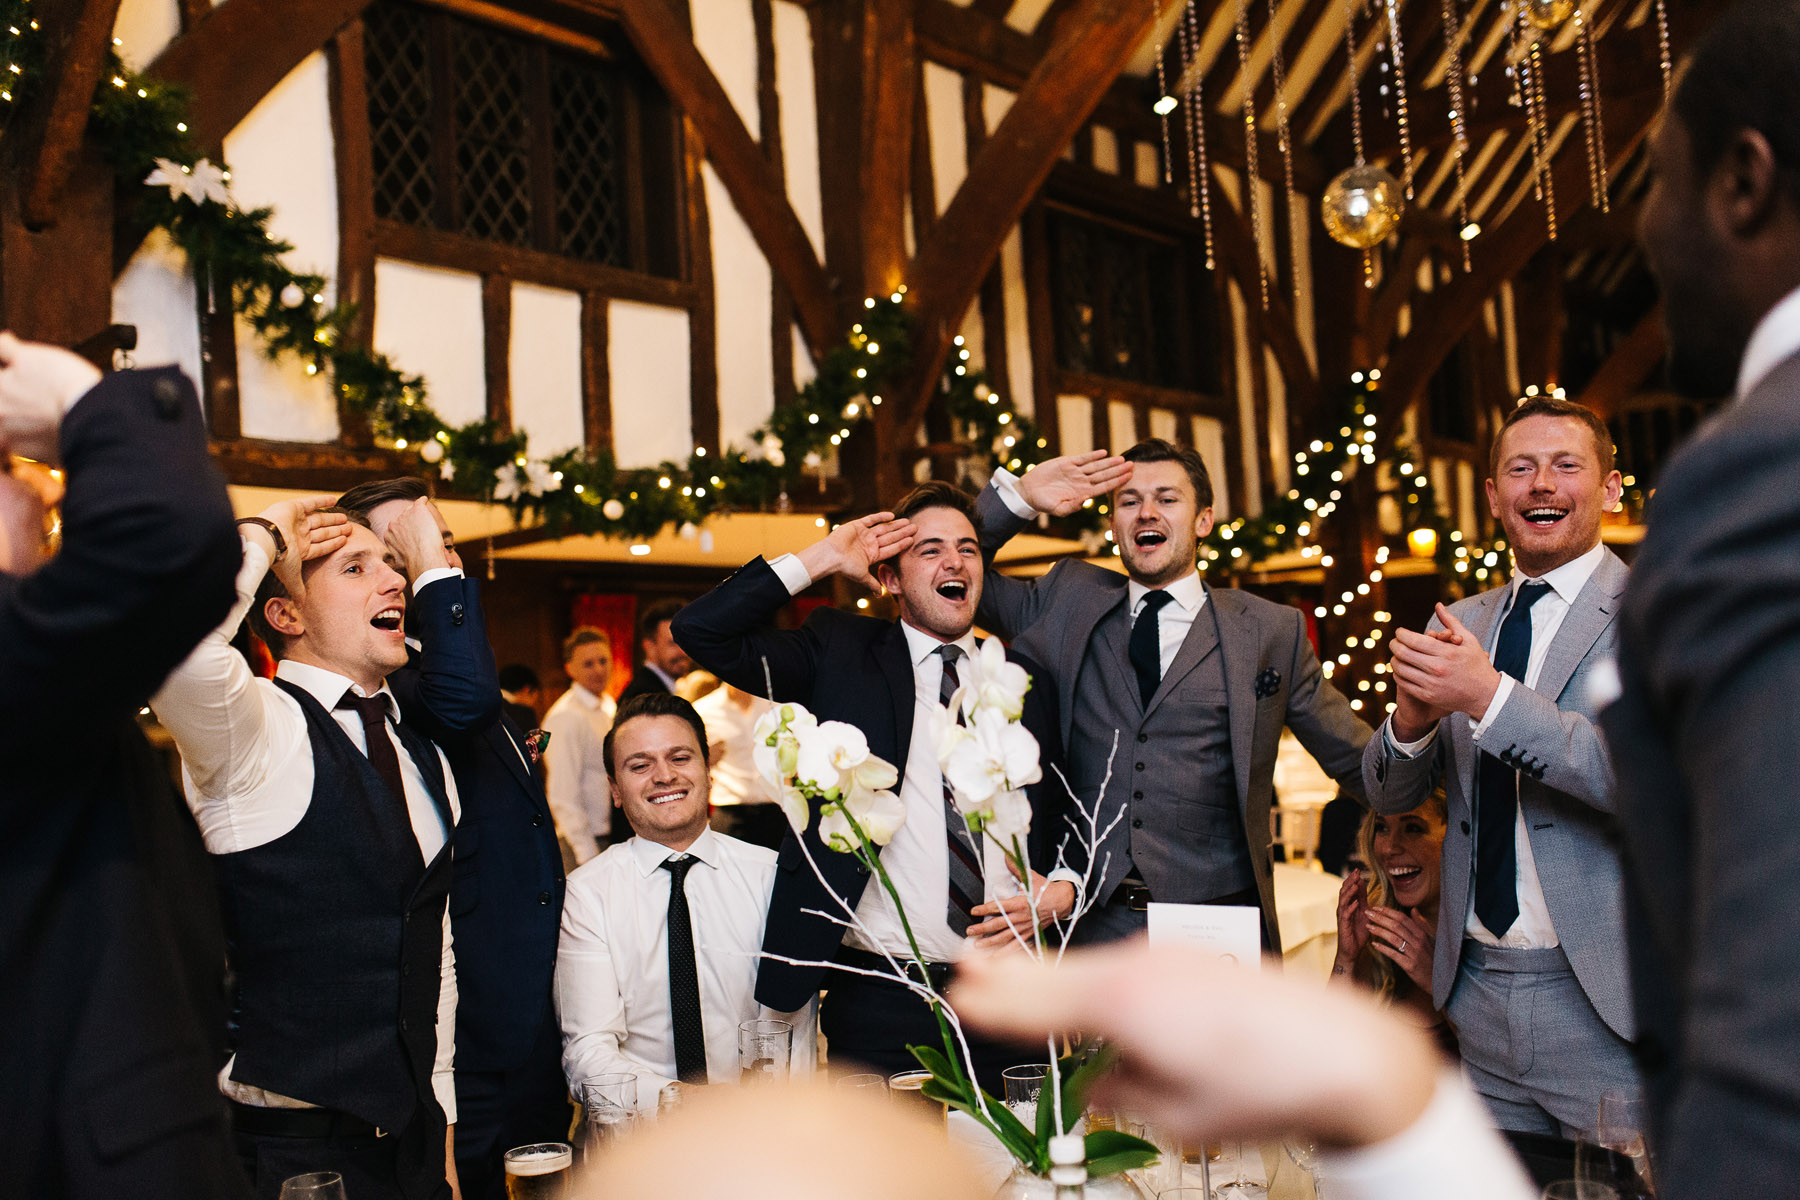 Candid images of speeches at a wedding 